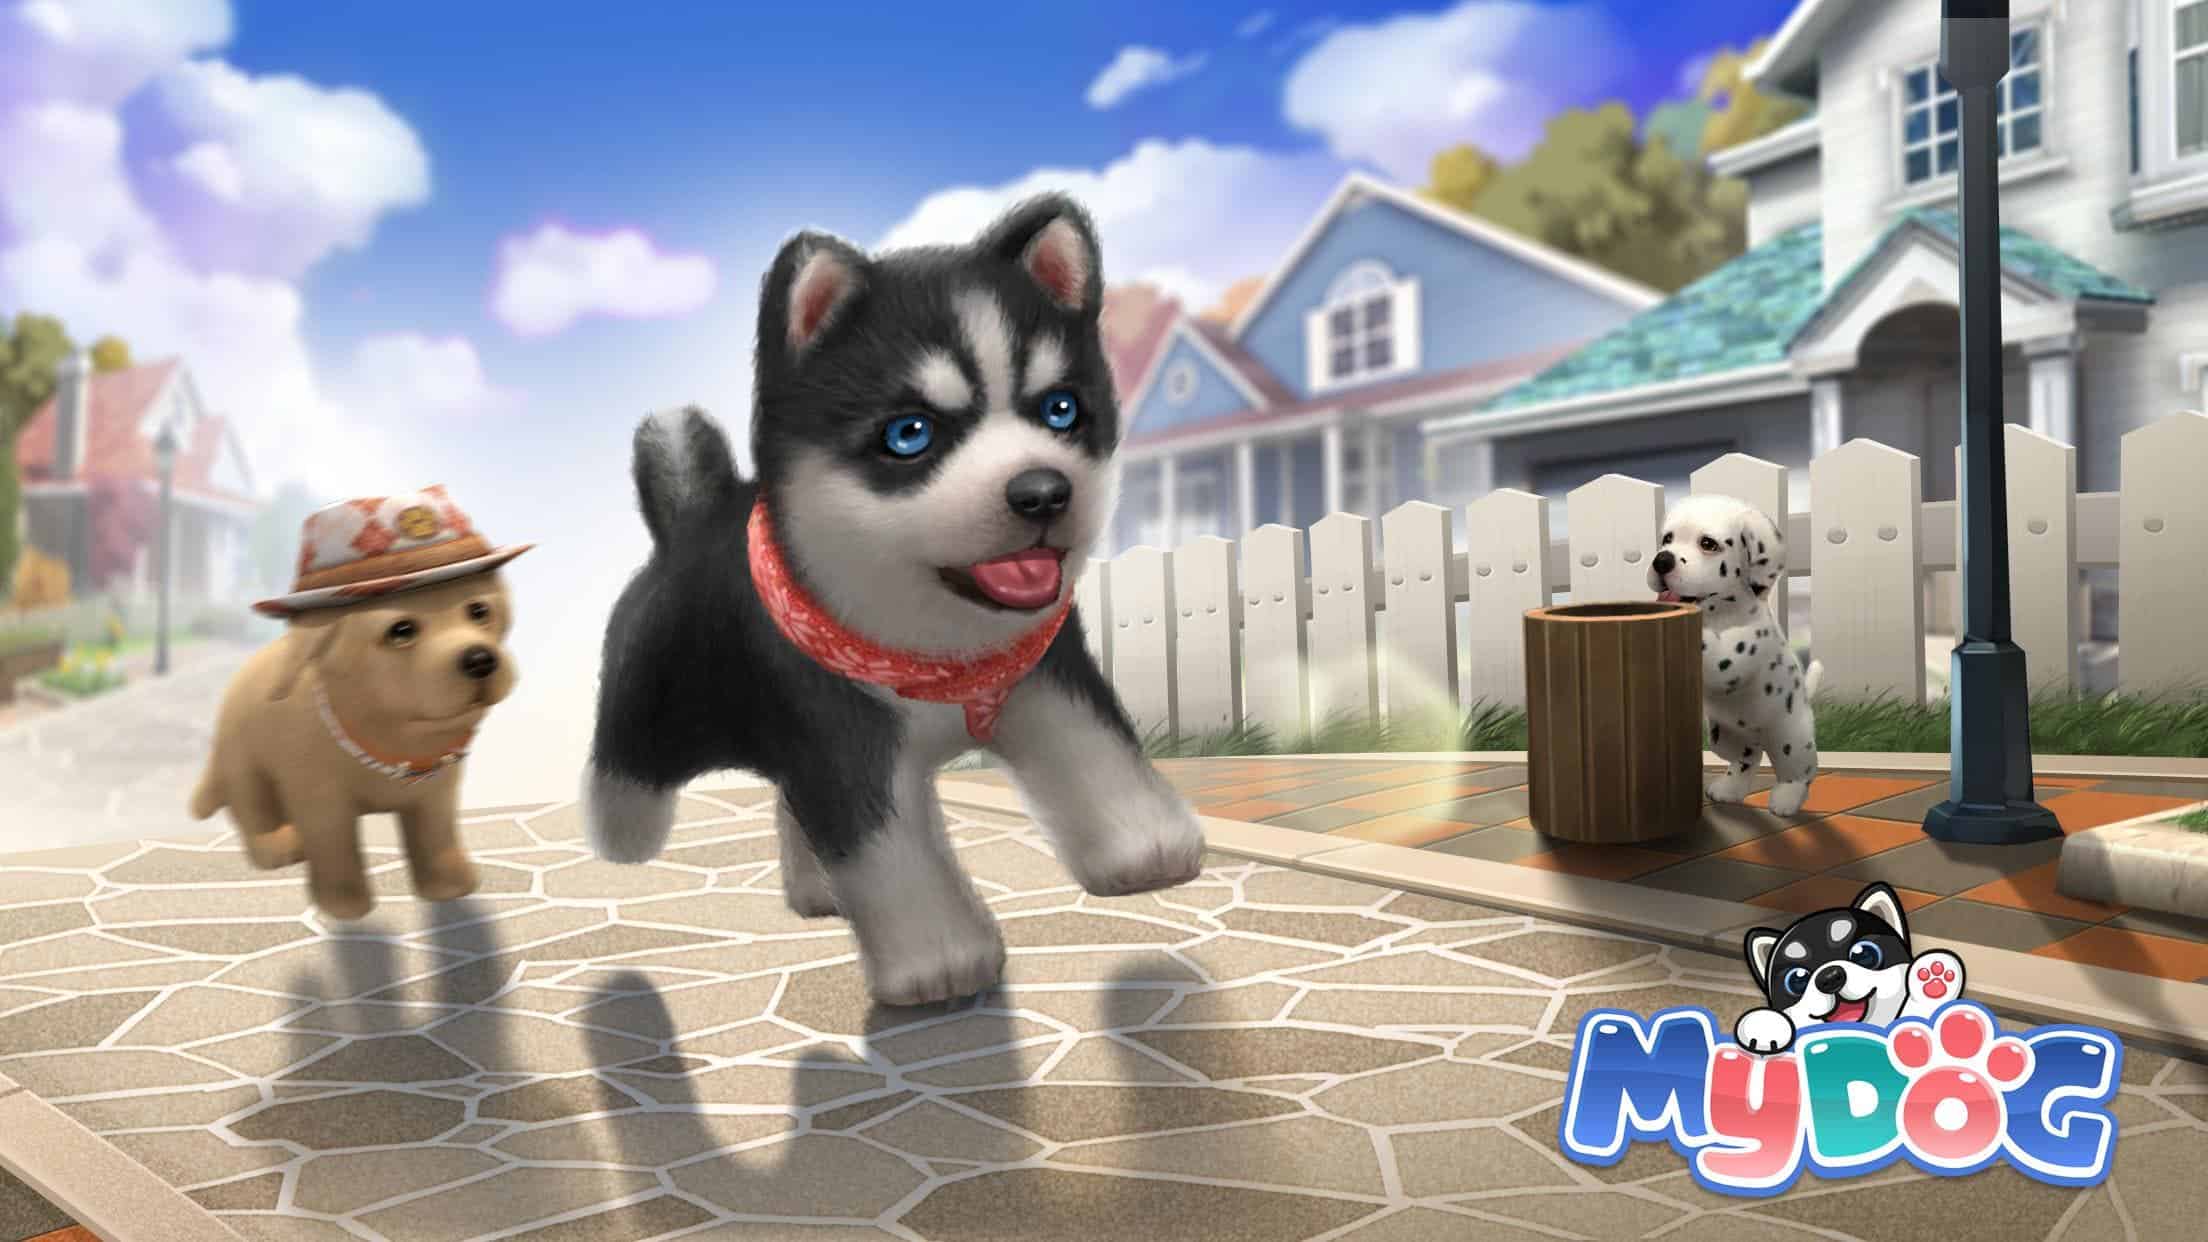 My Dog is a pet simulation game with over 60 breeds of dogs